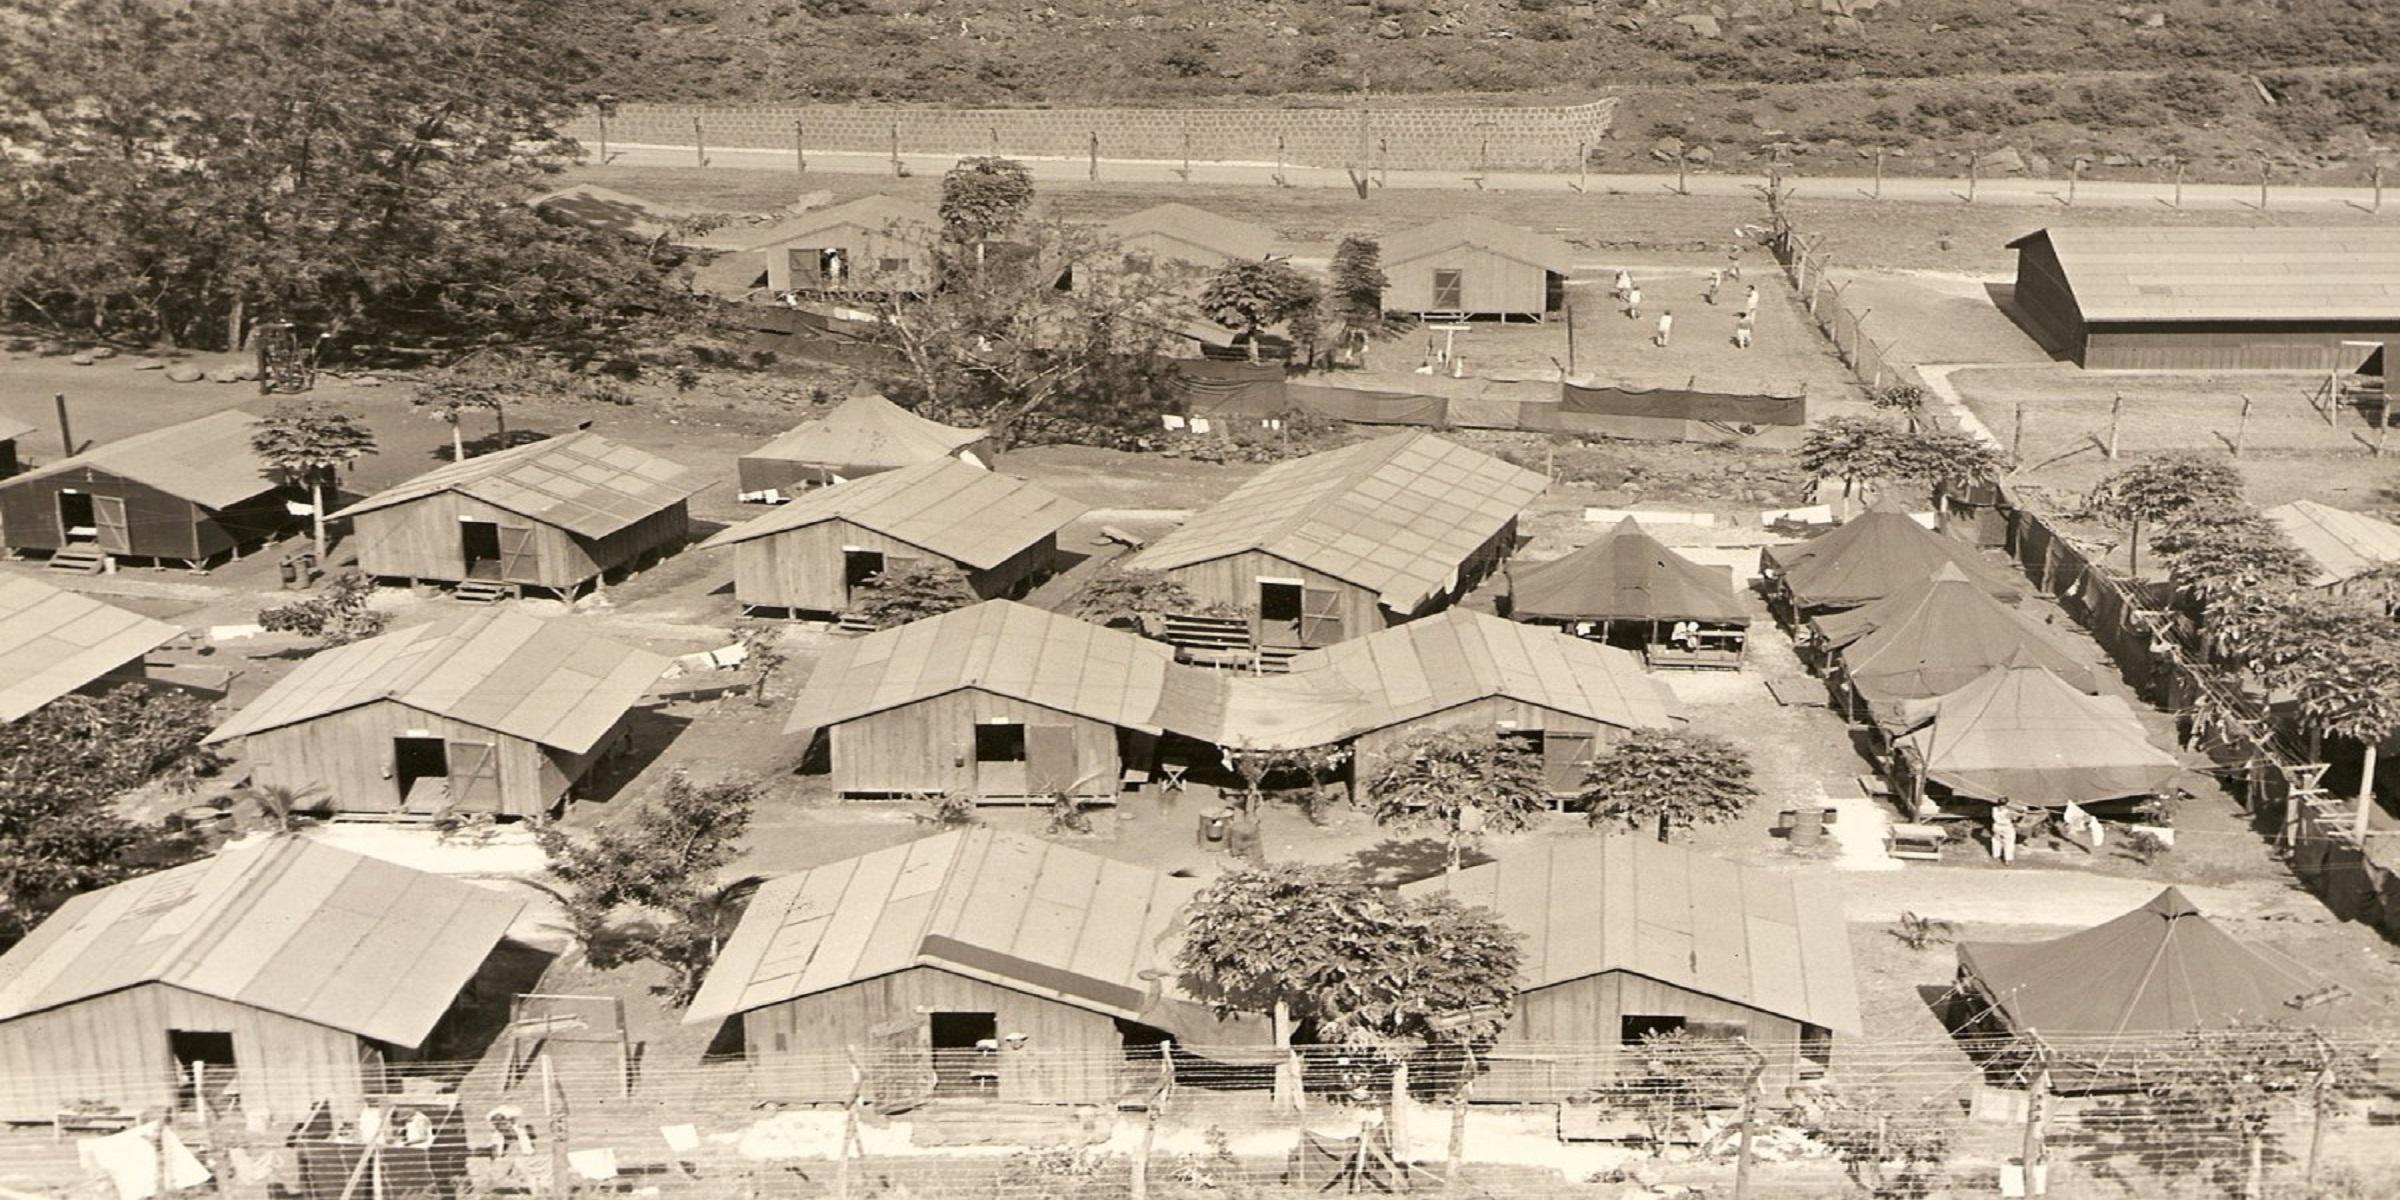 An overview of the American Internee barracks